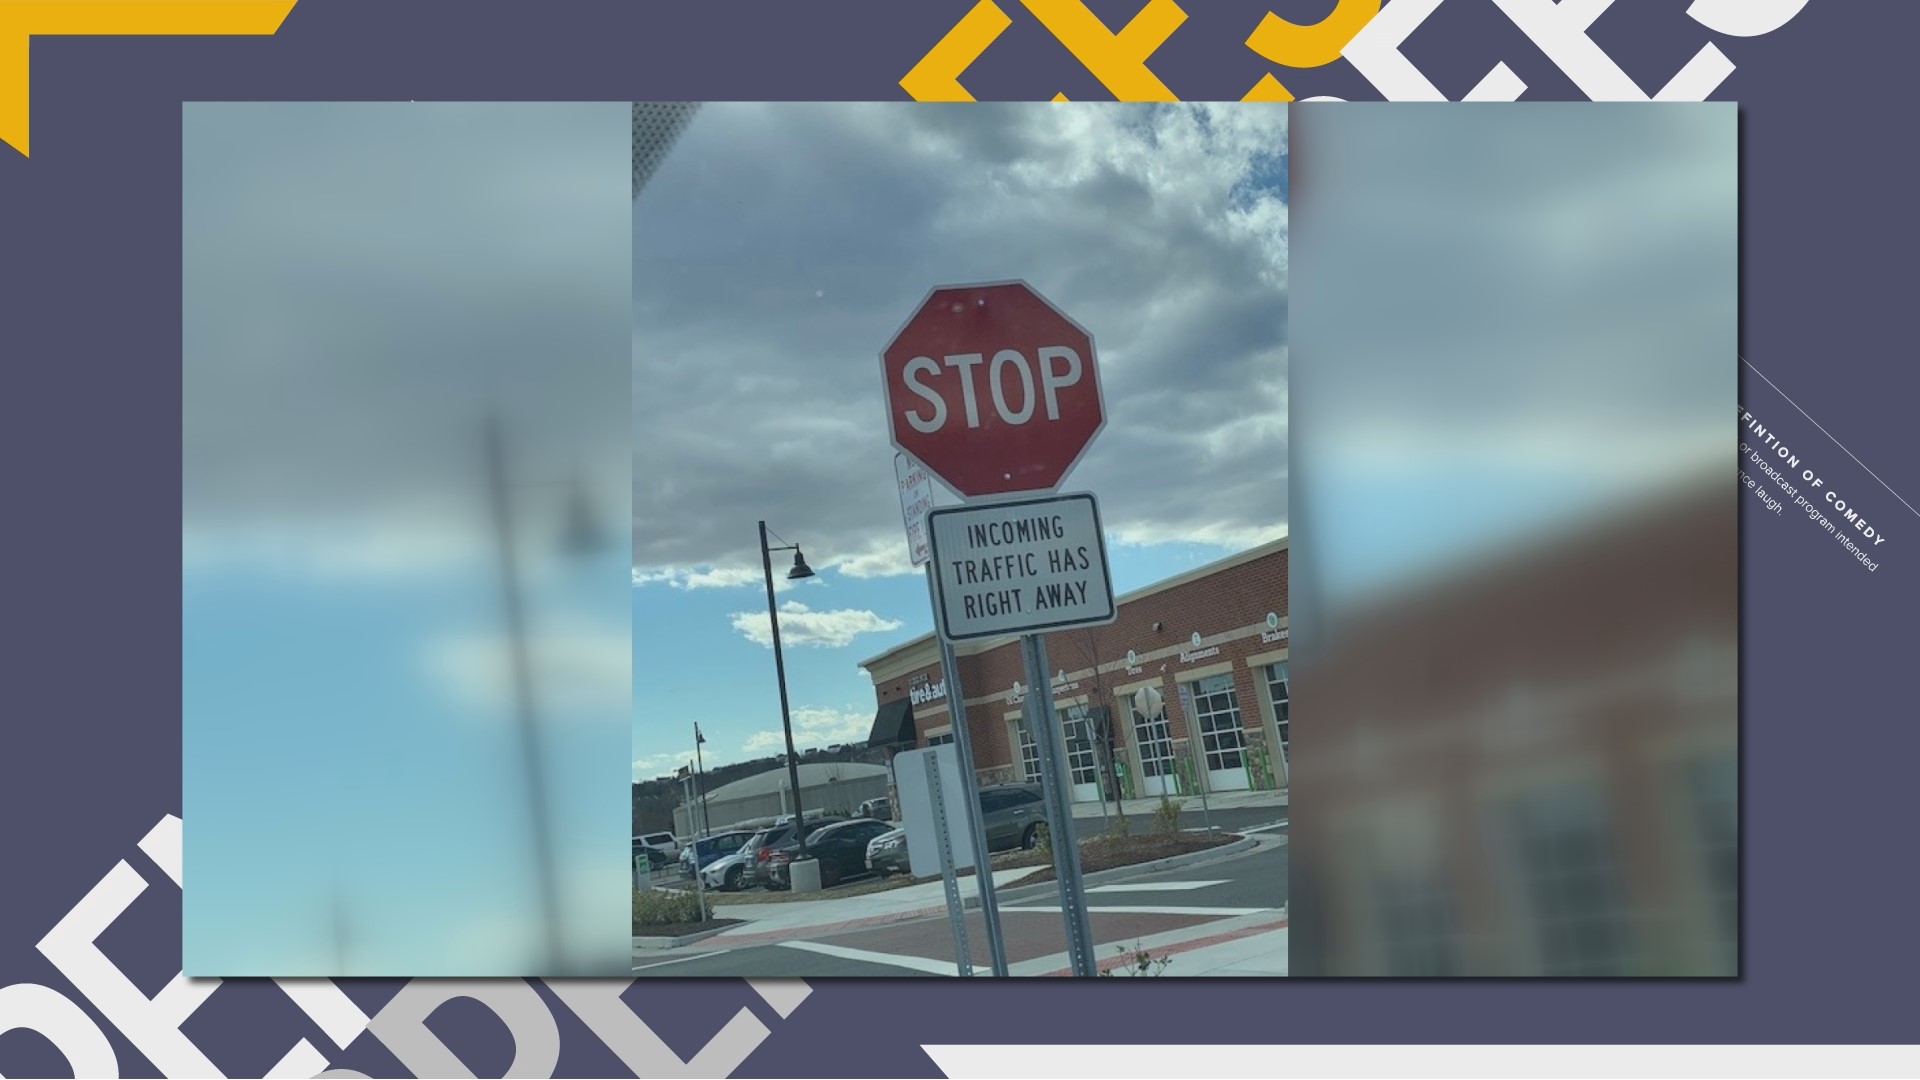 The viewer noticed that the message on the sign was incorrect.